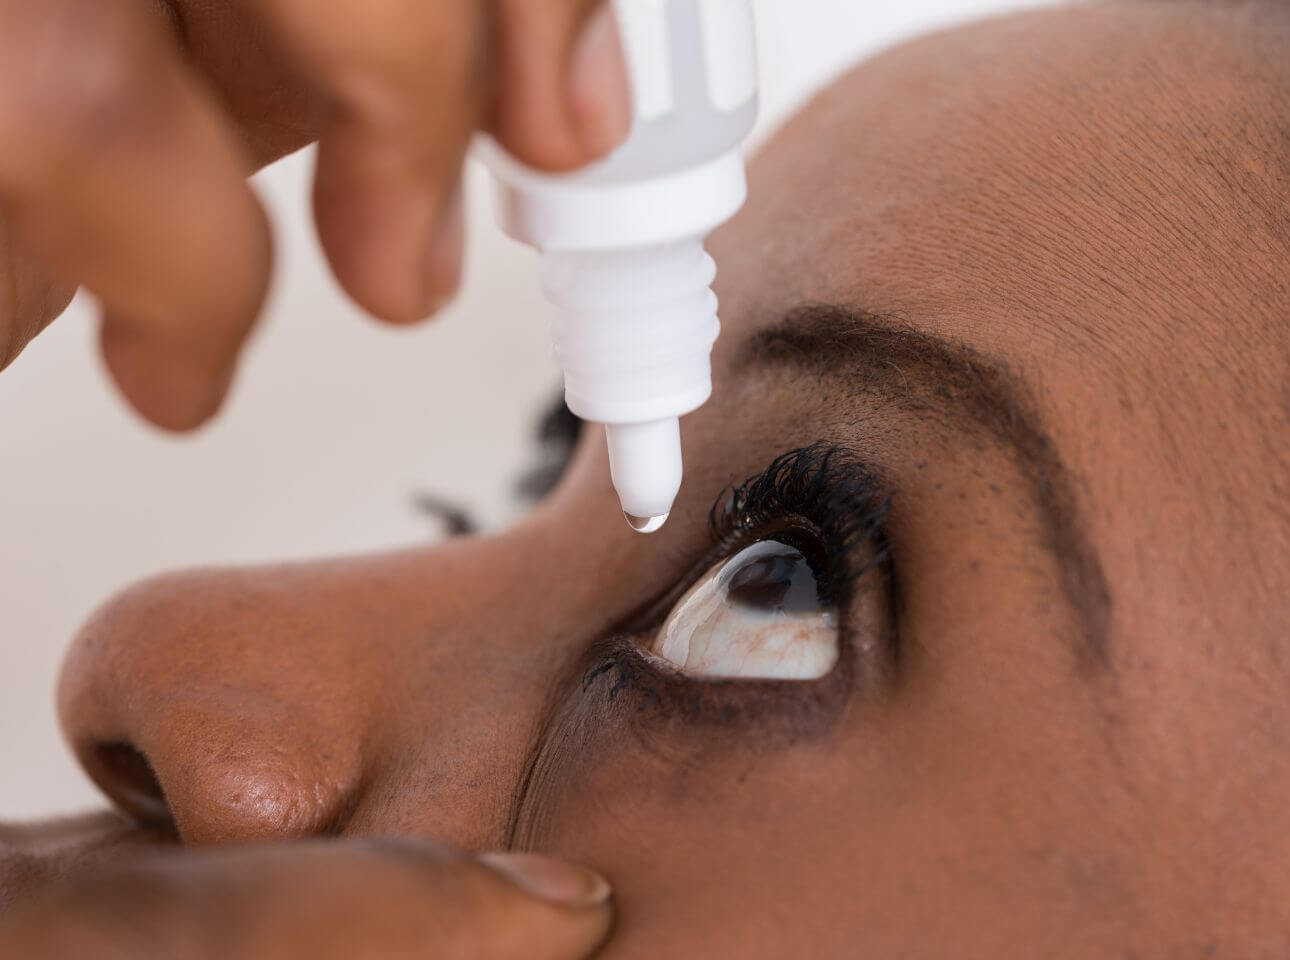 Can antibiotic eye drops cause yeast infection